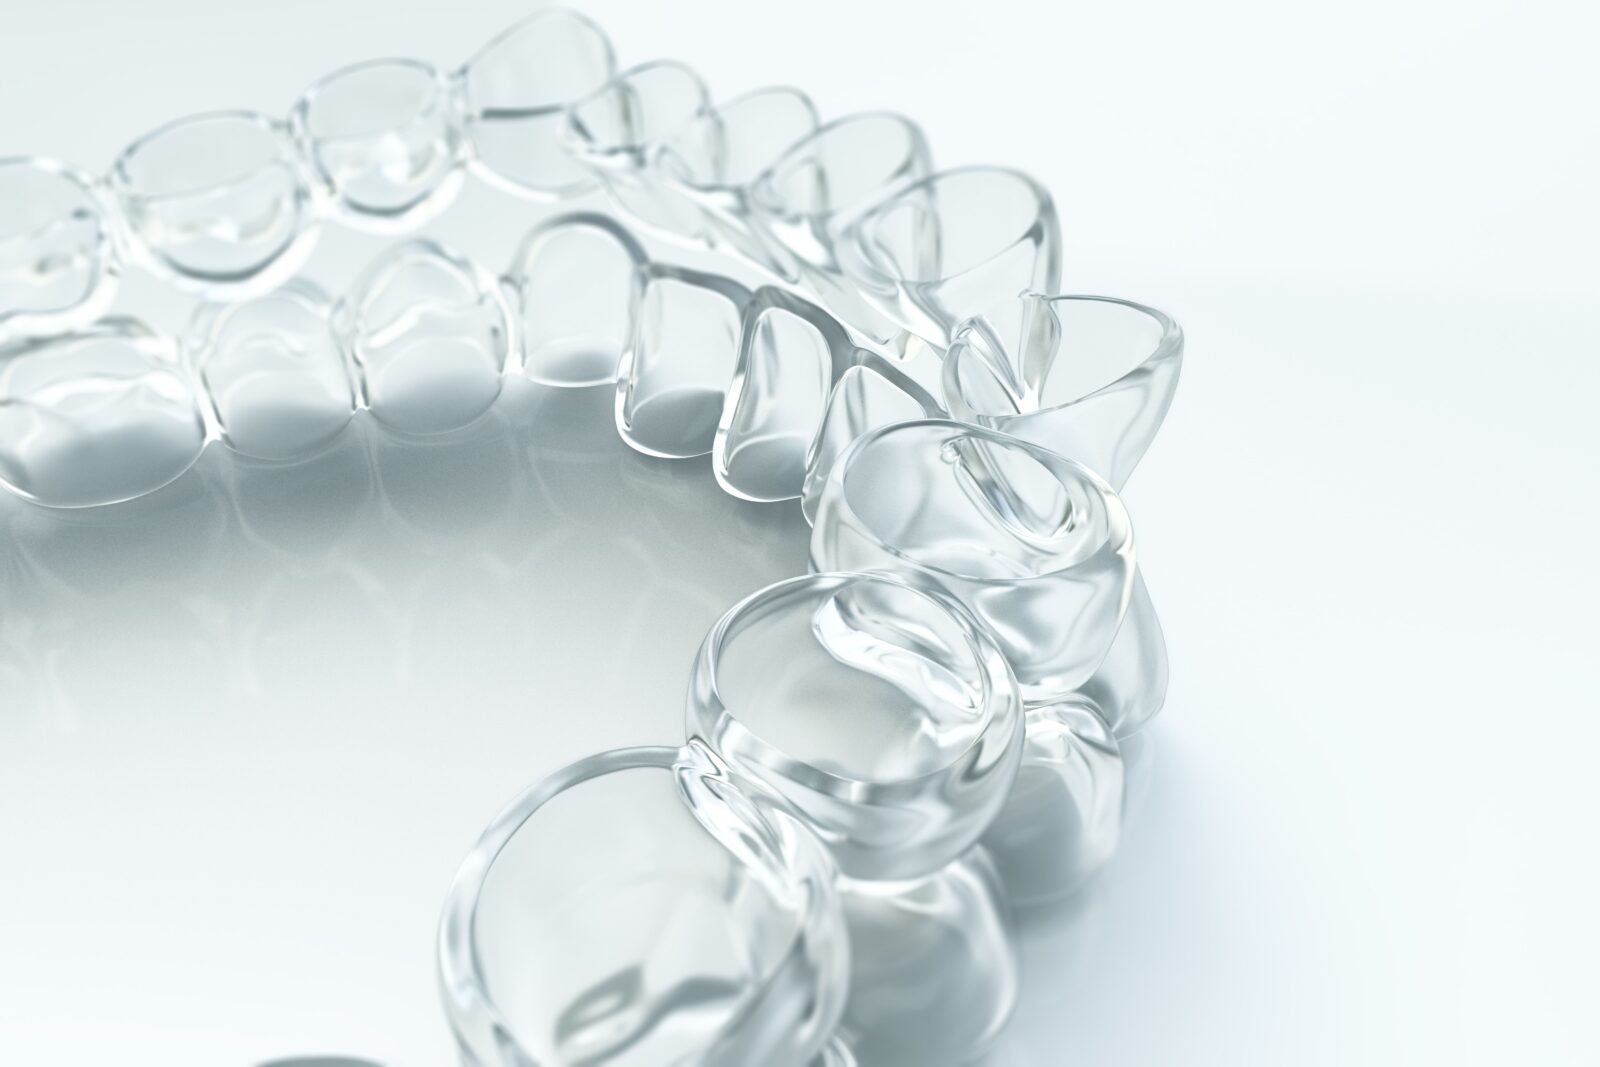 clear aligners for orthodontic treatment